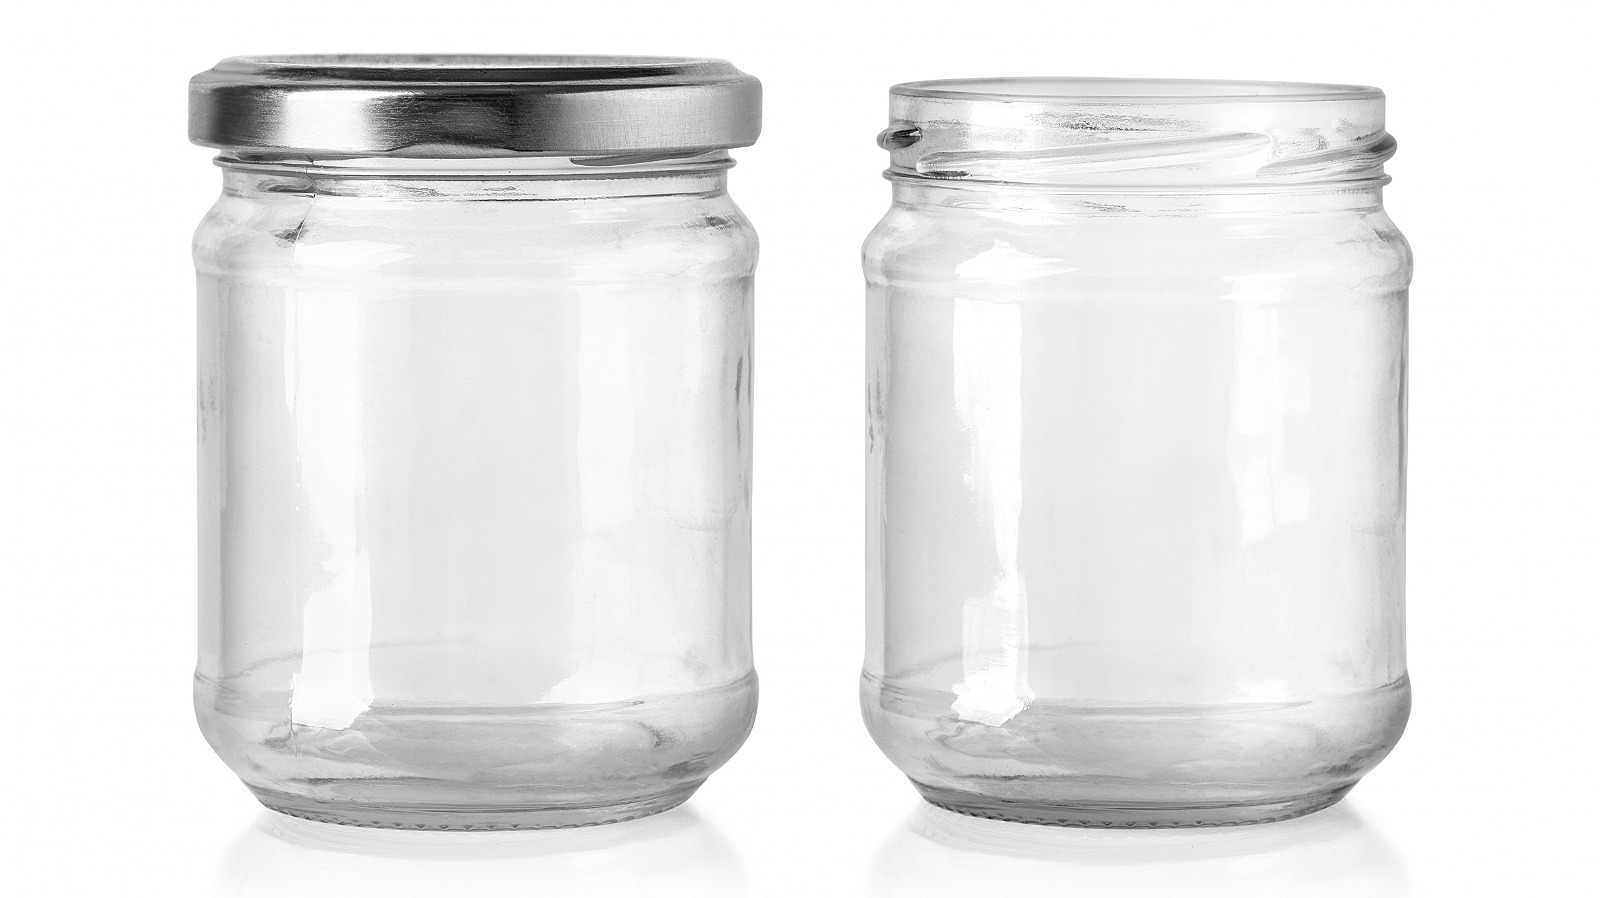 The Easiest Ways to Open a Jar